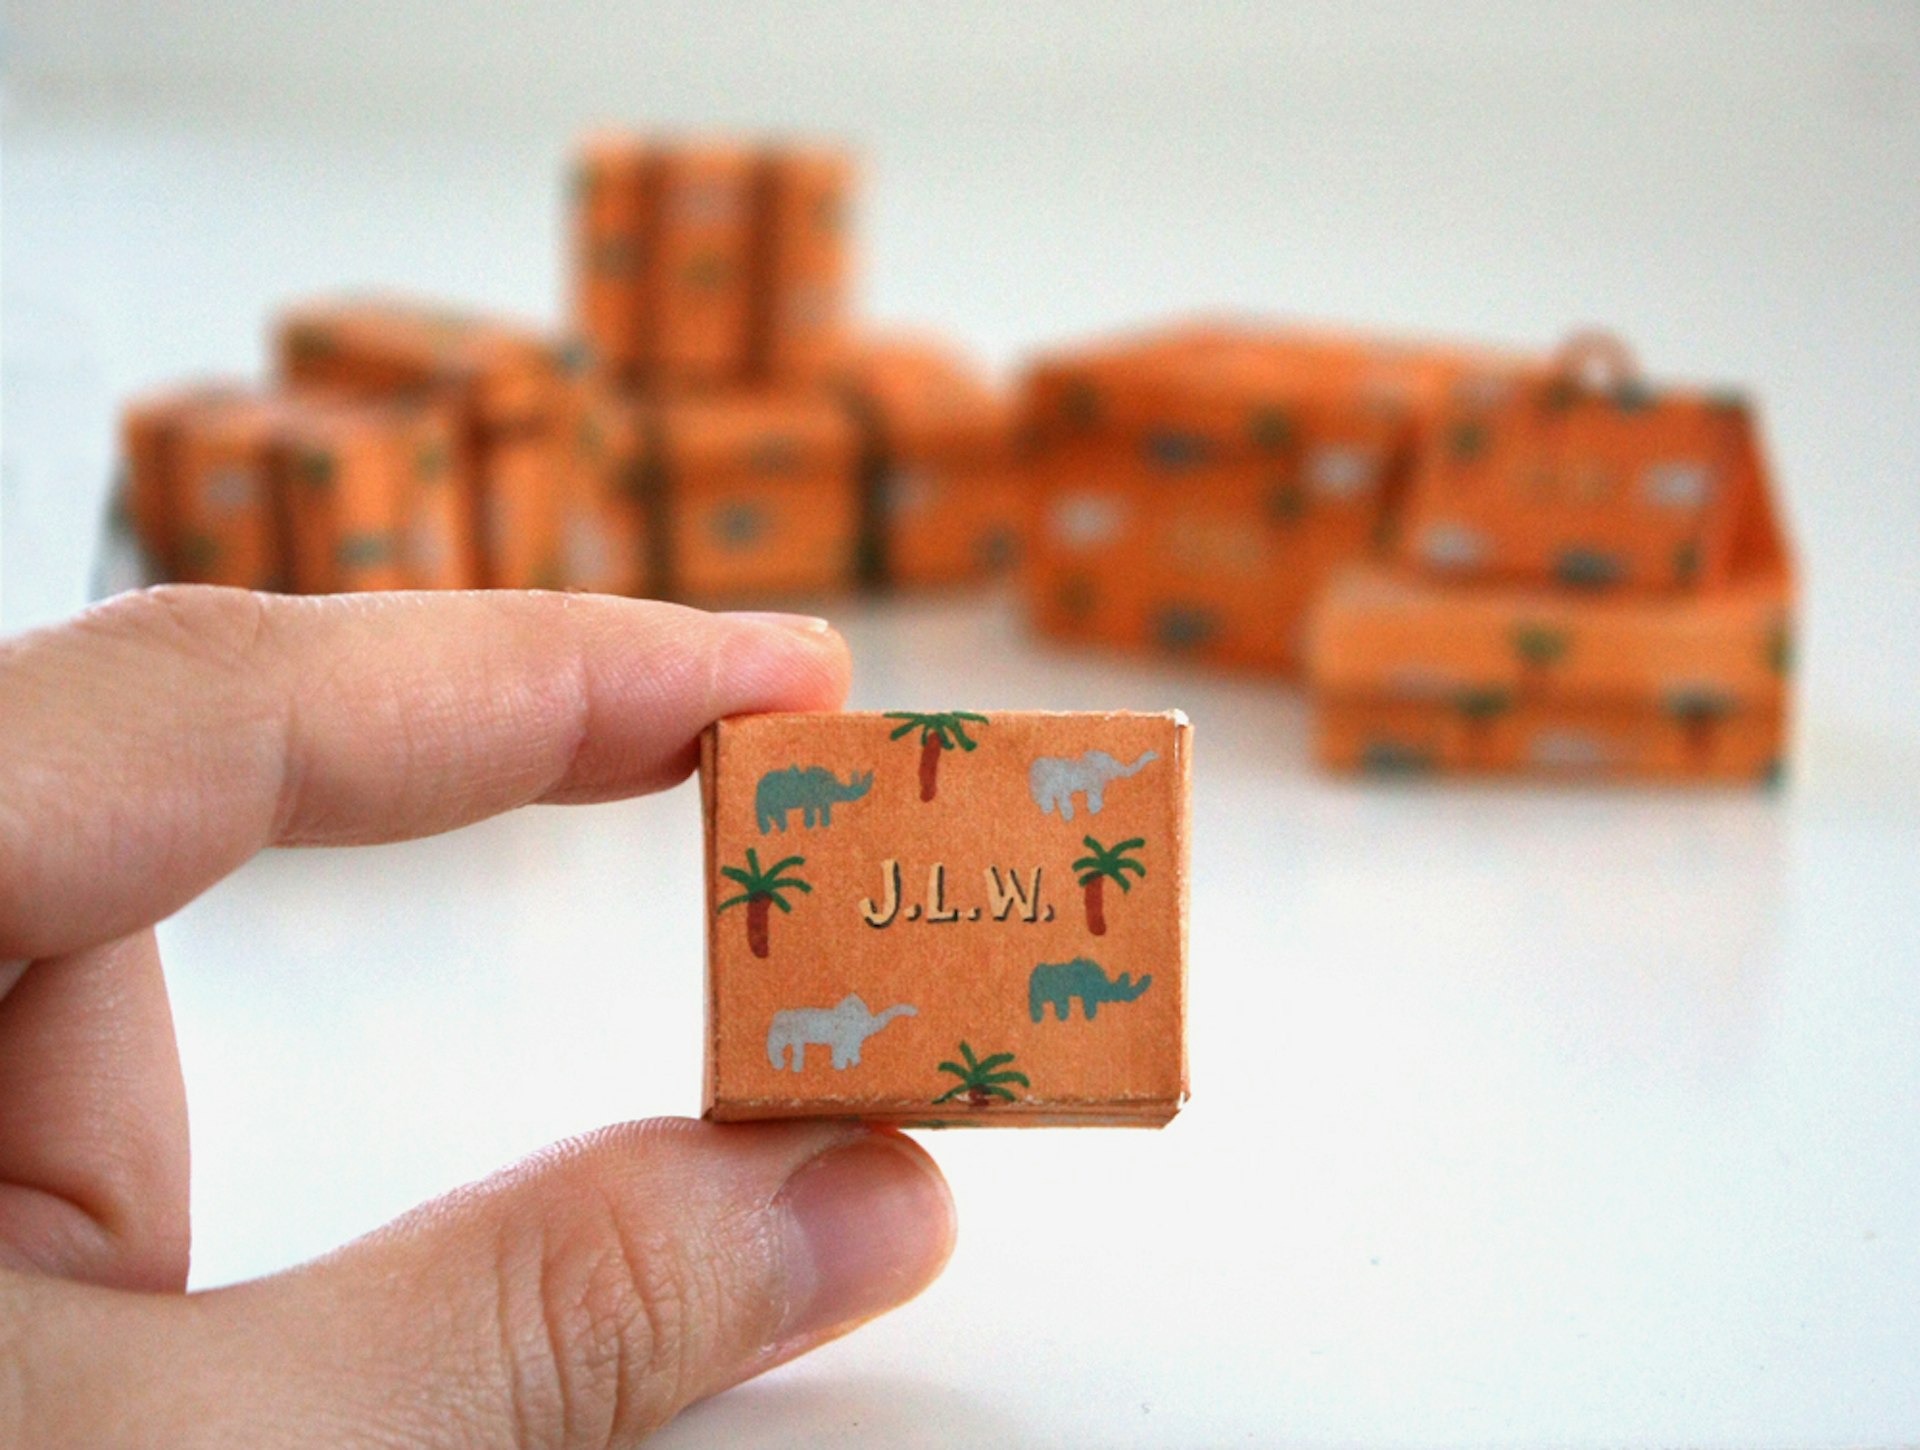 Mar Cerdà: the artist recreating the world of Wes Anderson in miniature